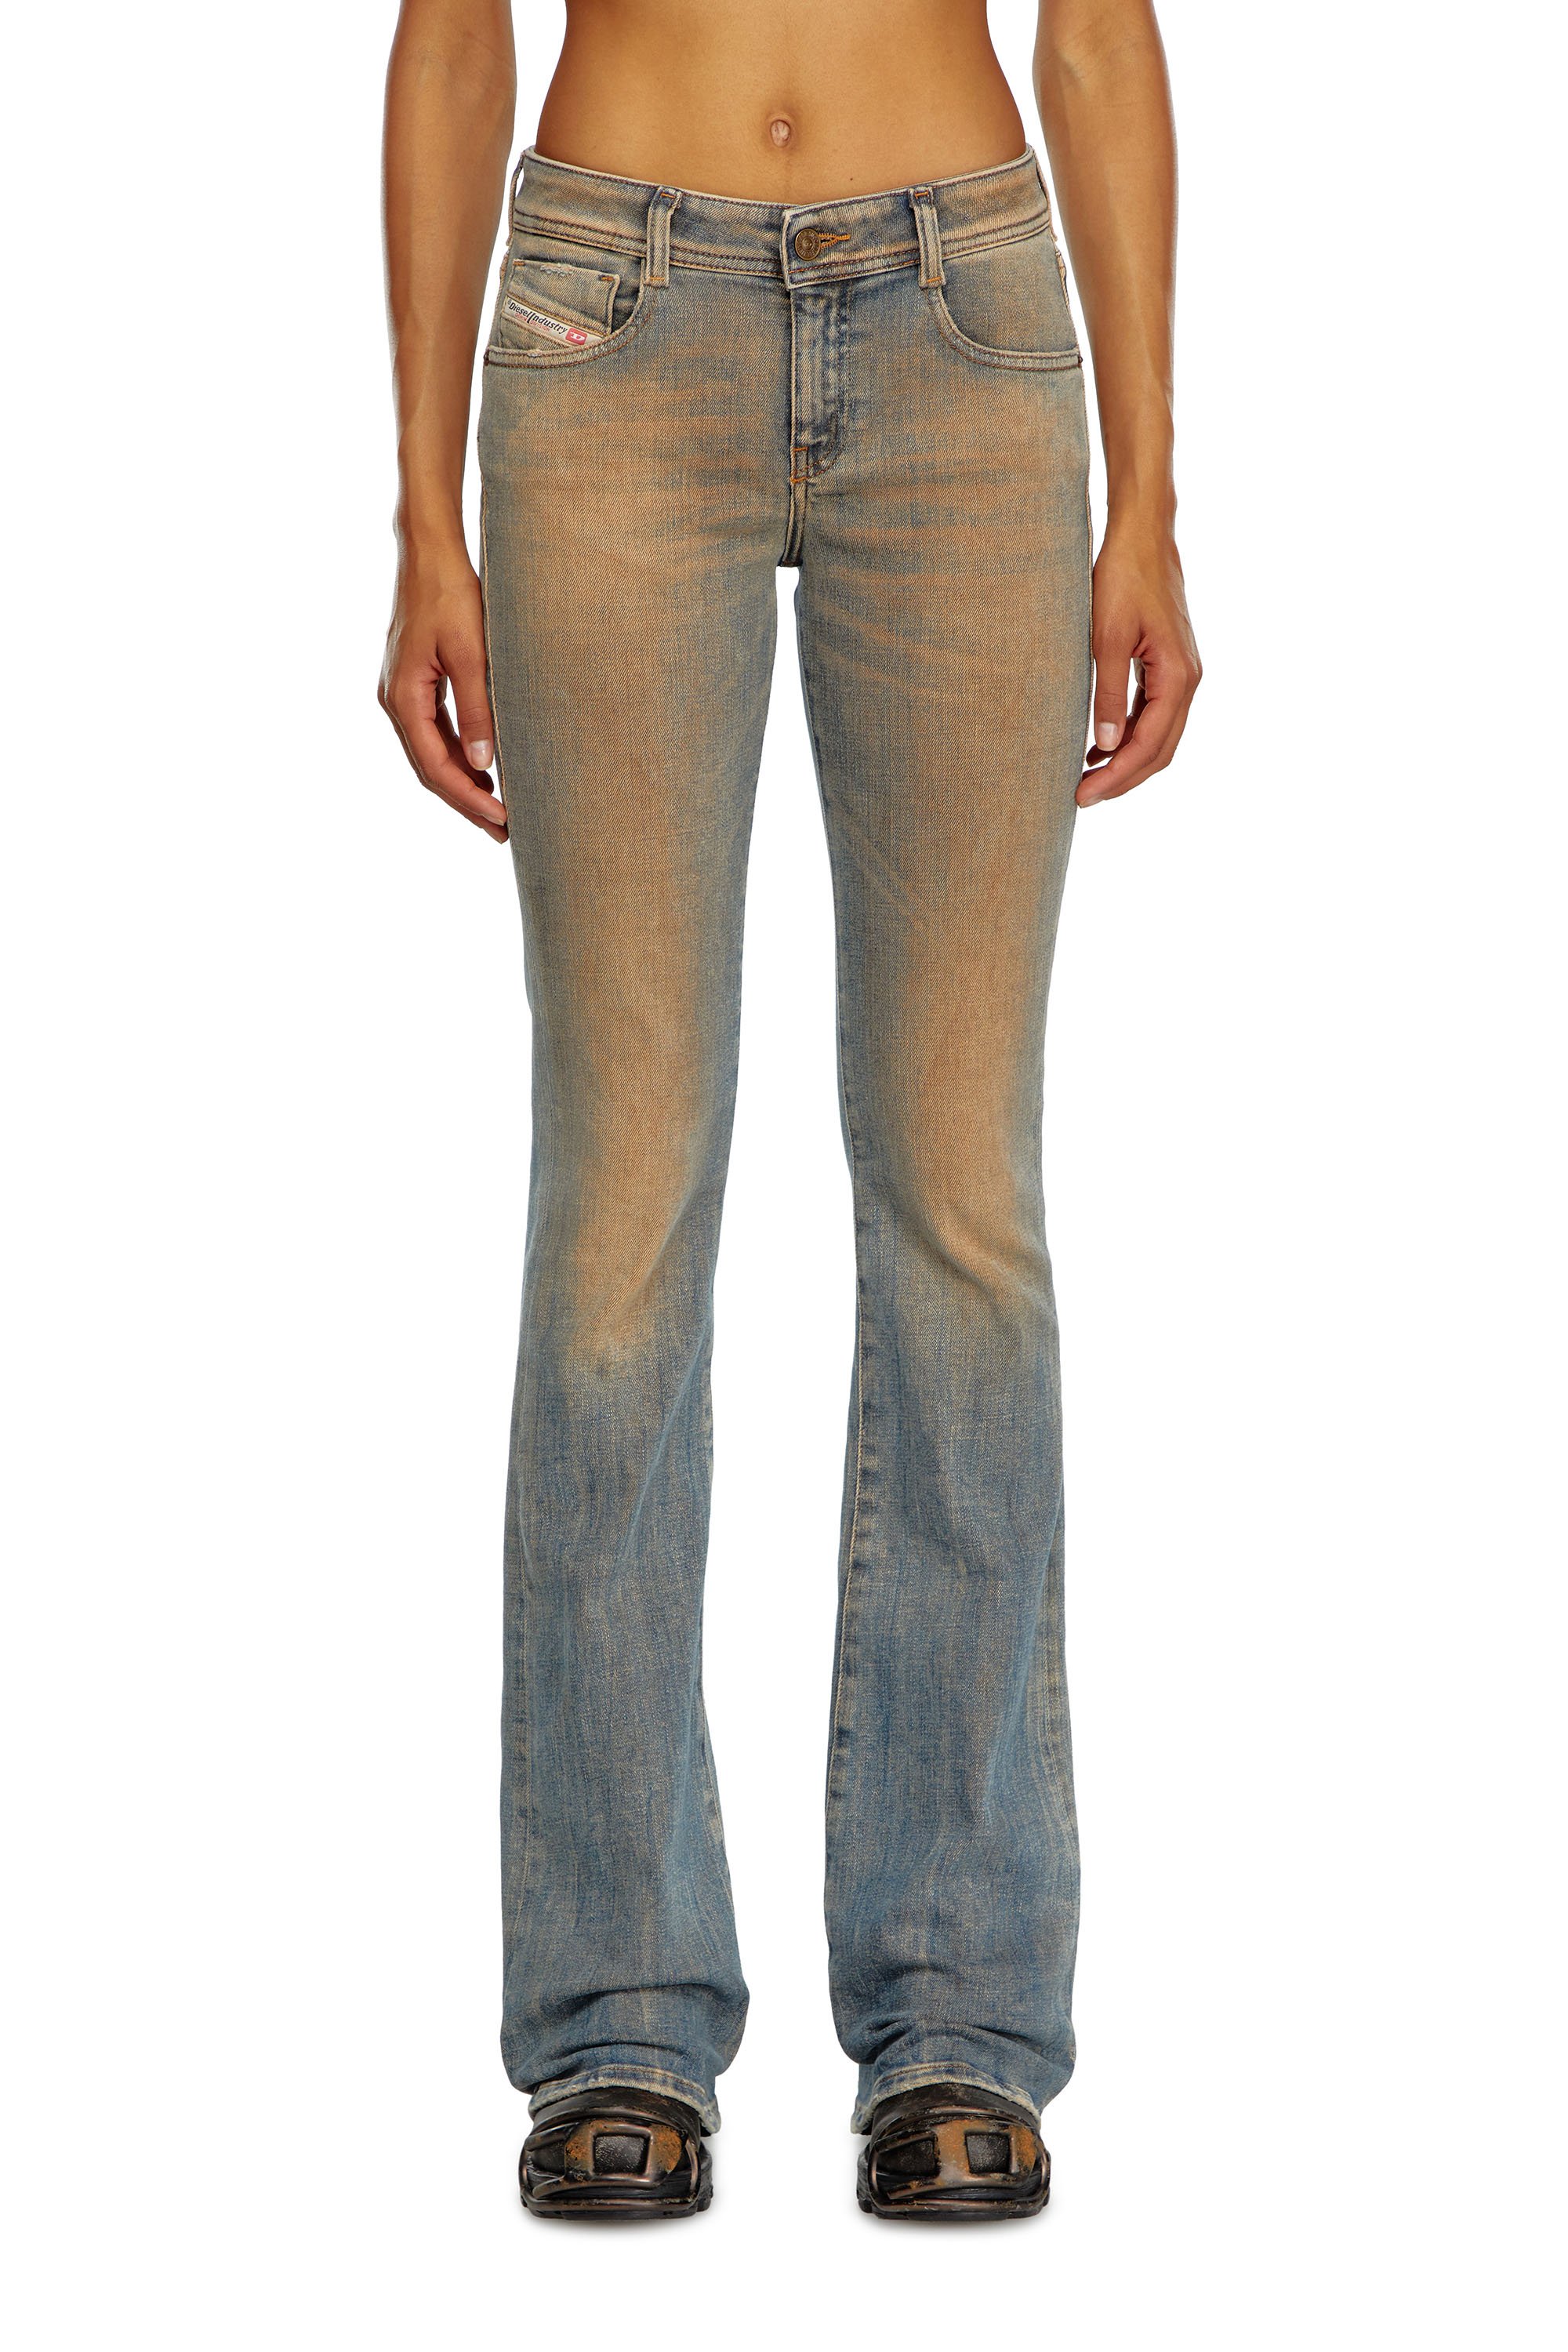 Diesel - Bootcut and Flare Jeans 1969 D-Ebbey 09J23, Mujer Bootcut y Flare Jeans - 1969 D-Ebbey in Azul marino - Image 2